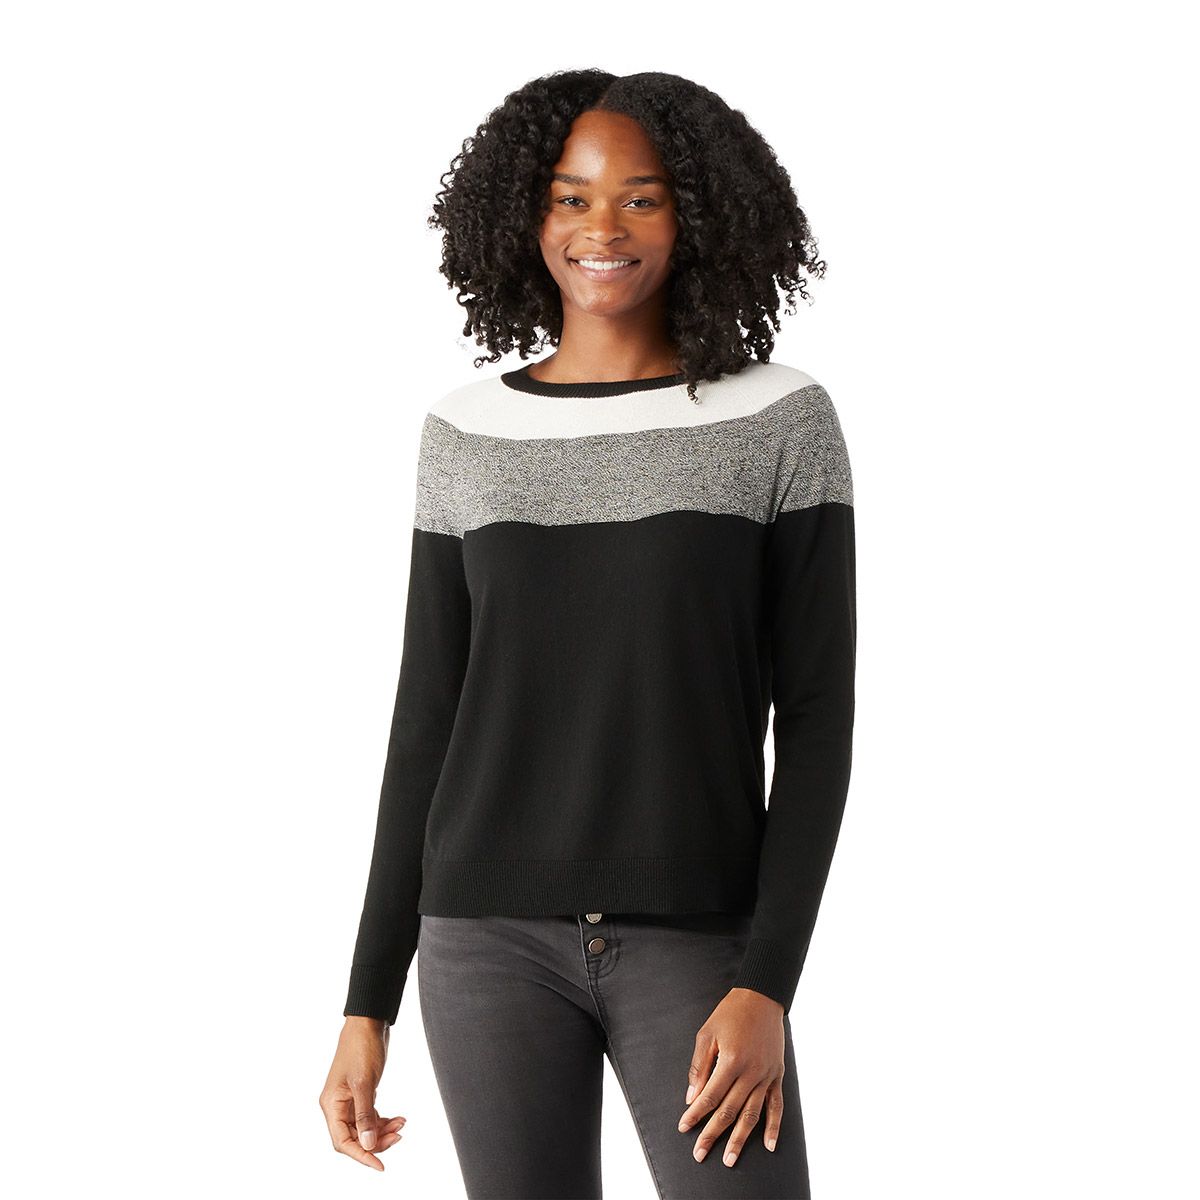 JDEFEG Soft Oversize Sweater Women's Stacked Collar Color Contrast